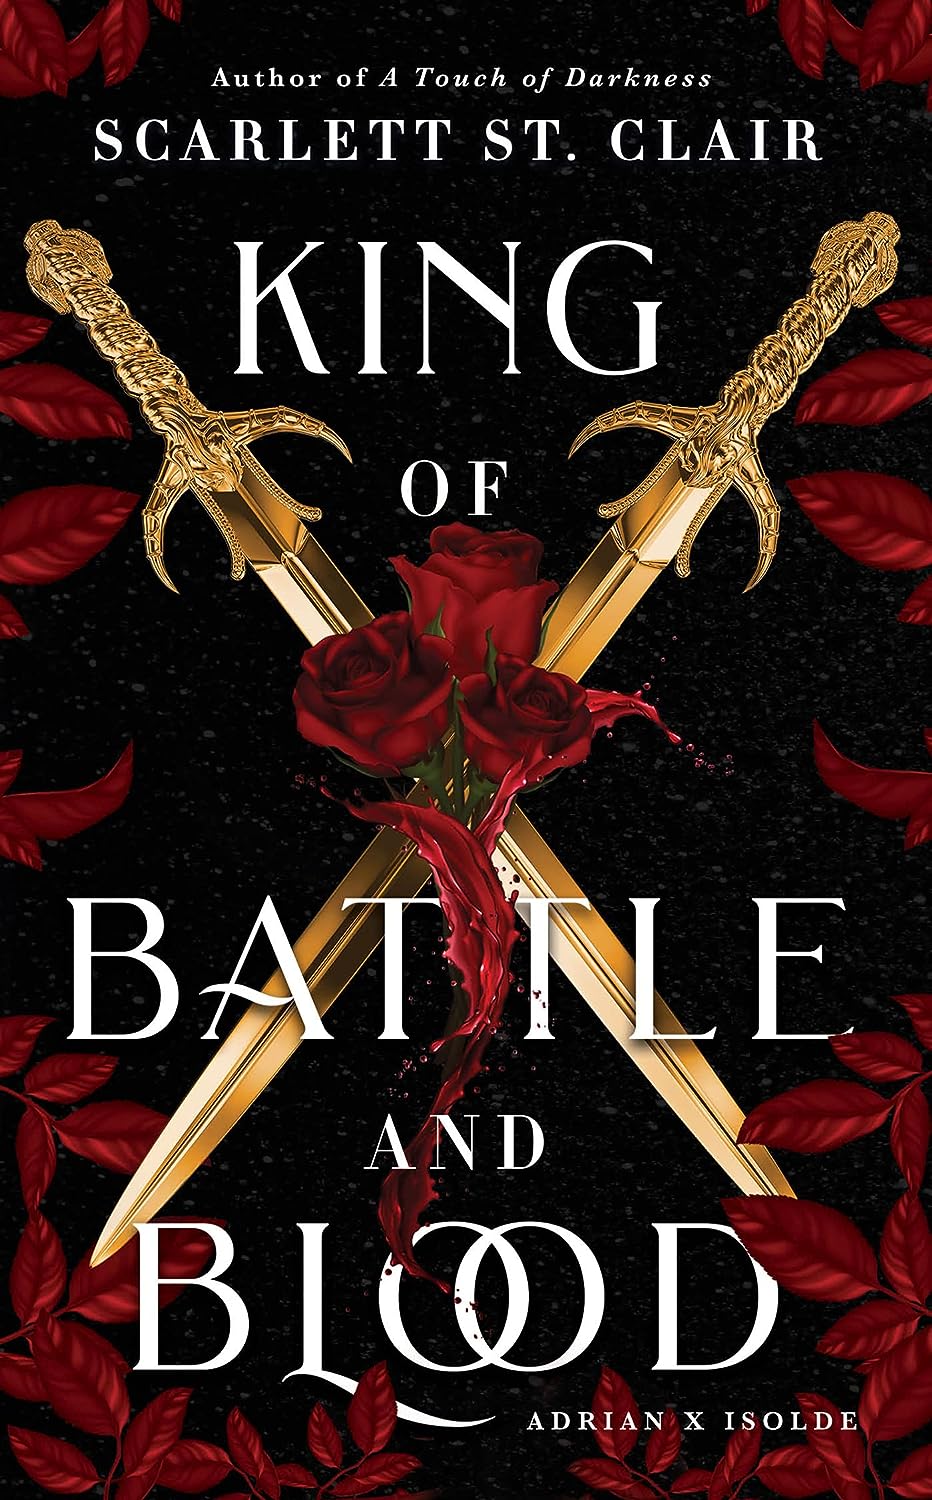 King of Battle and Blood (Adrian X Isolde Book 1) by Scarlett St. Clair